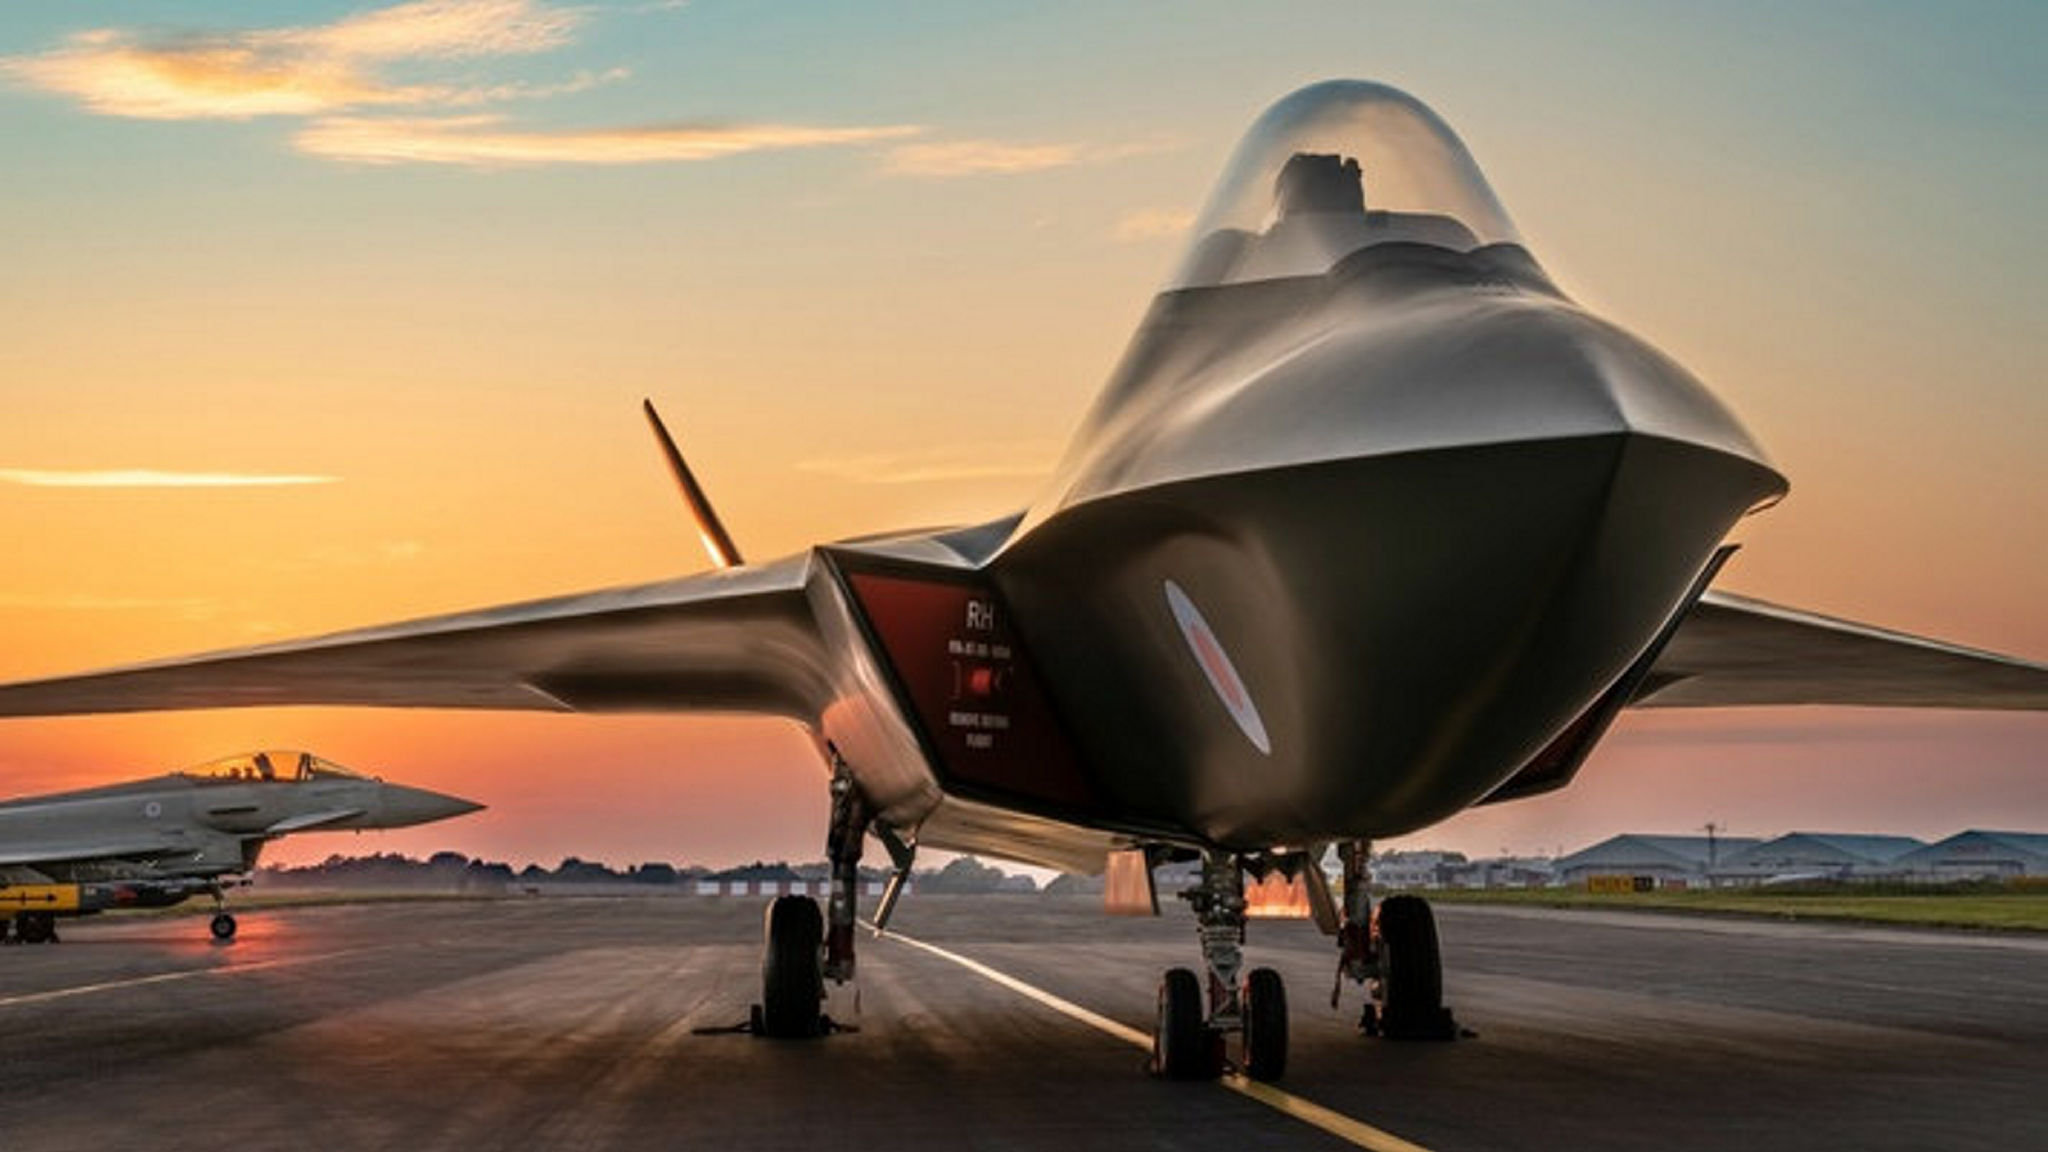 UK invests £656m in development of sixth-generation Tempest fighter